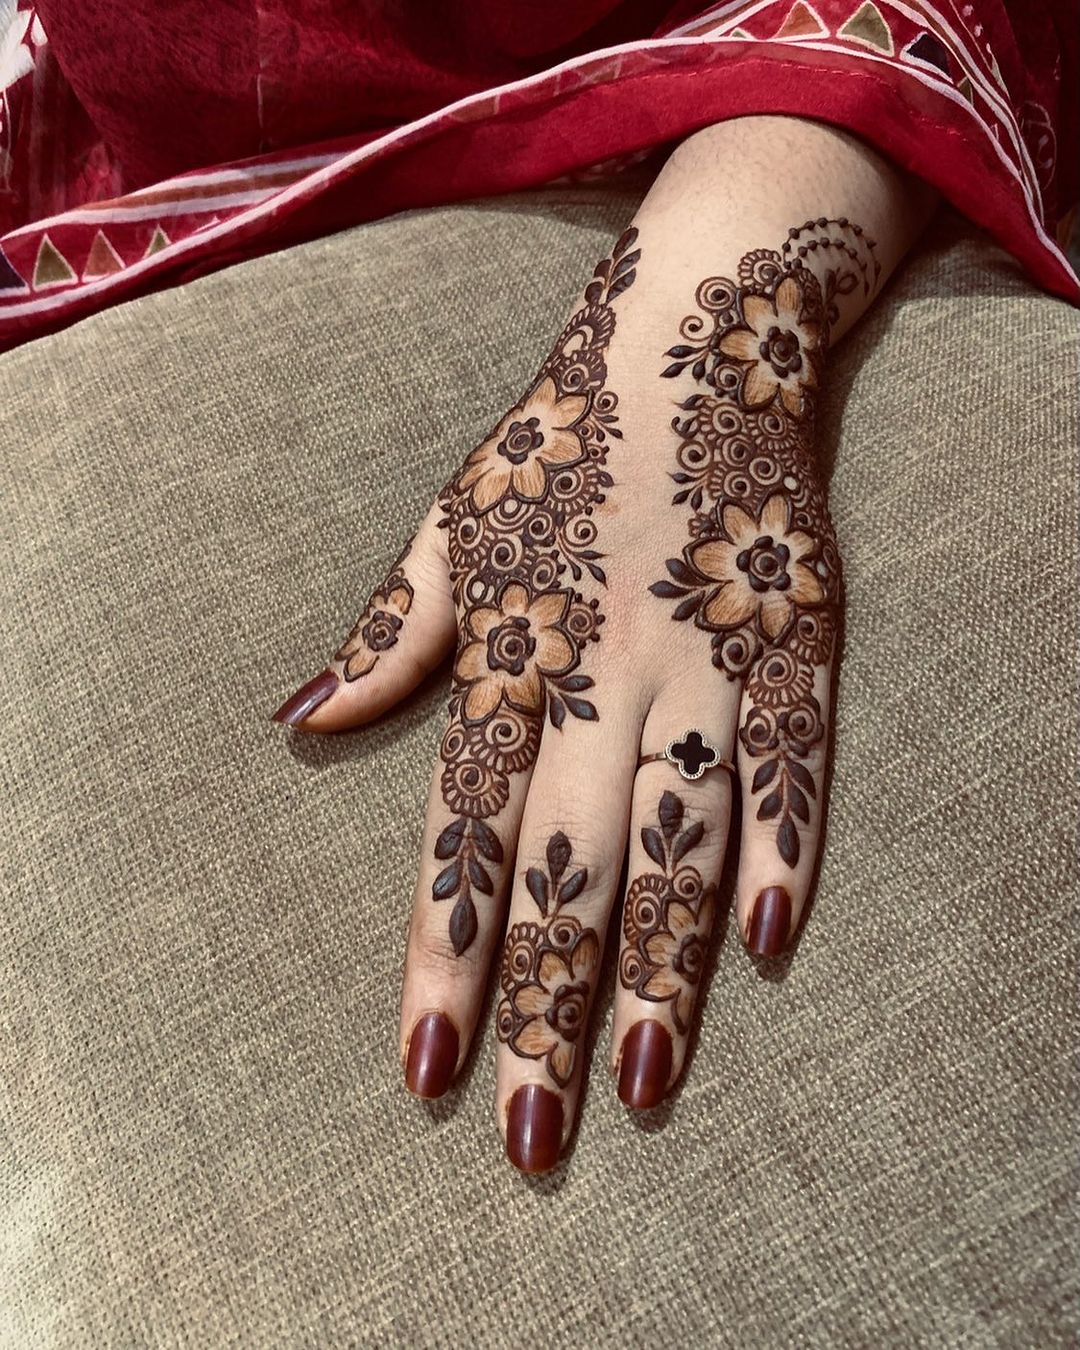 10 Cool Facts About Henna Tattoos You've Never Heard Before